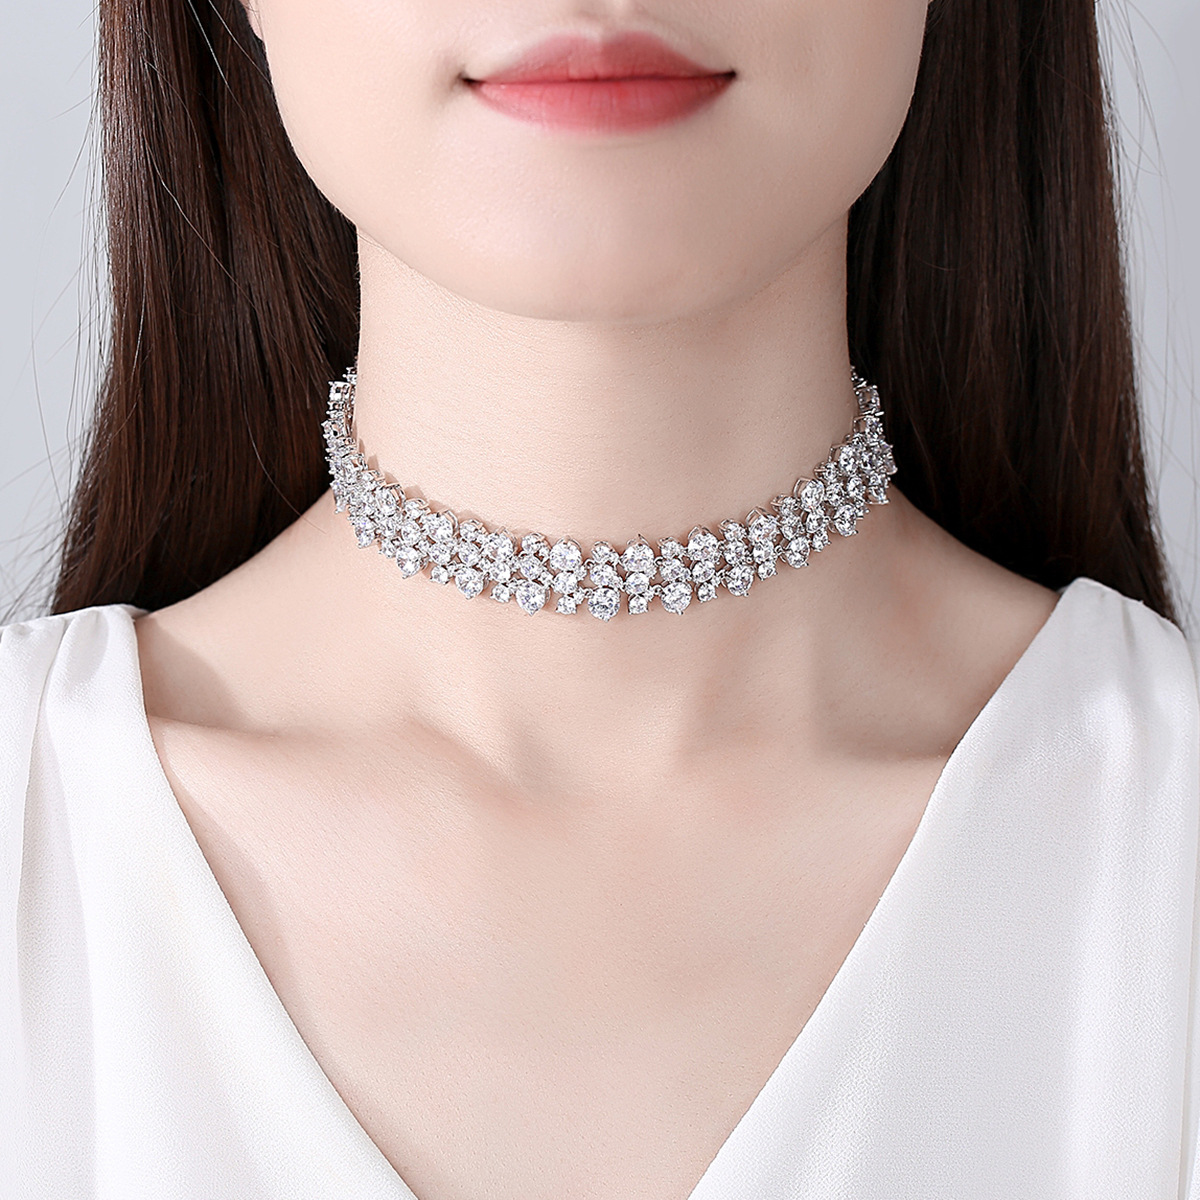 European style clavicle necklace white accessories for women